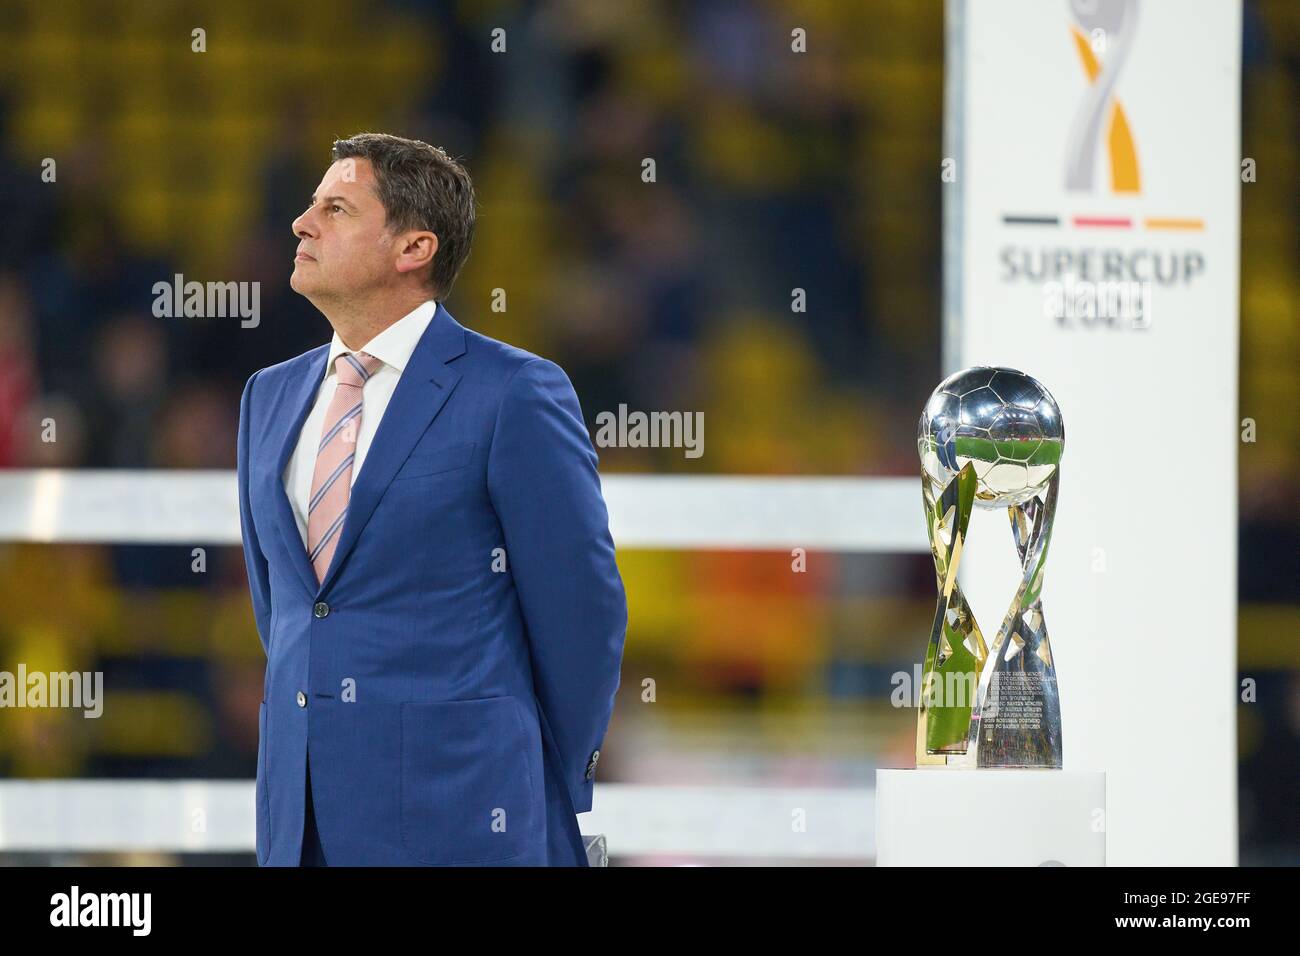 Christian SEIFERT, CEO, managing director DFL Deutsche Fußball Liga GmbH, DFL board member, with trophy in the Final DFL Super Cup match BORUSSIA DORTMUND - FC BAYERN MÜNCHEN 1-3 on August 17, 2021 in Dortmund, Germany  Season 2020/2021, BVB, Muenchen, Munich, Bavaria © Peter Schatz / Alamy Live News    - DFL REGULATIONS PROHIBIT ANY USE OF PHOTOGRAPHS as IMAGE SEQUENCES and/or QUASI-VIDEO - Stock Photo